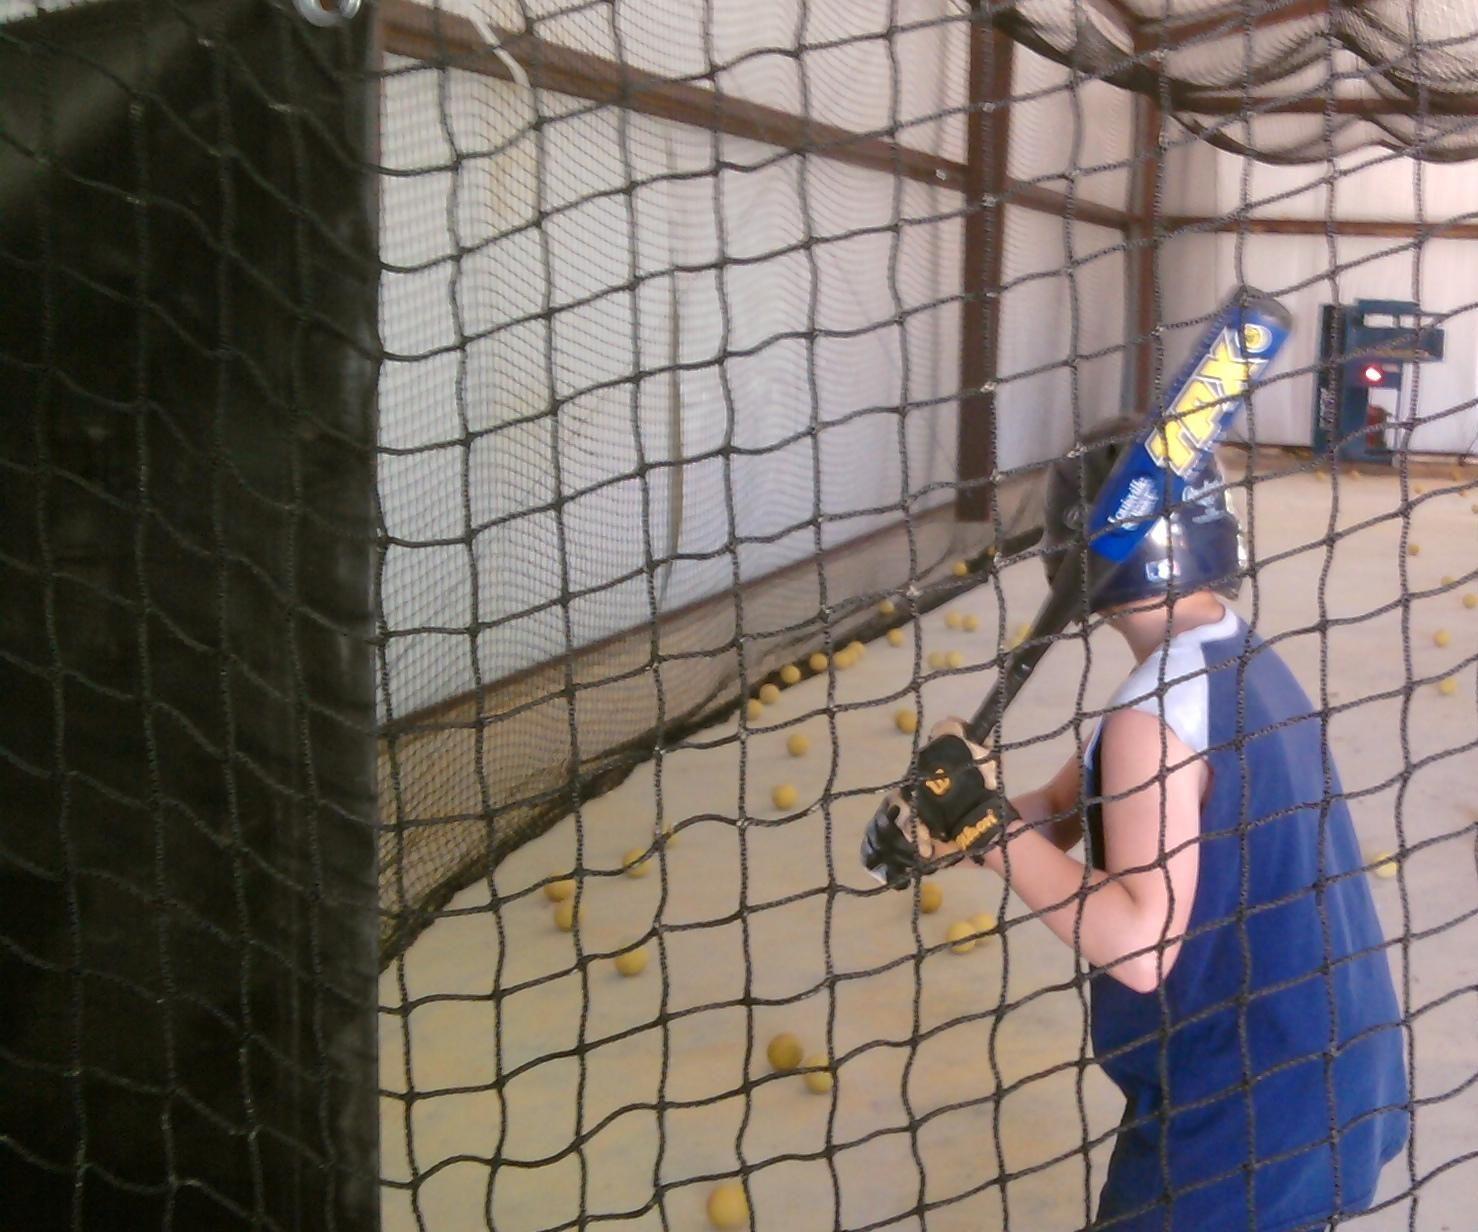 All Steel Enclosed Batting Cage